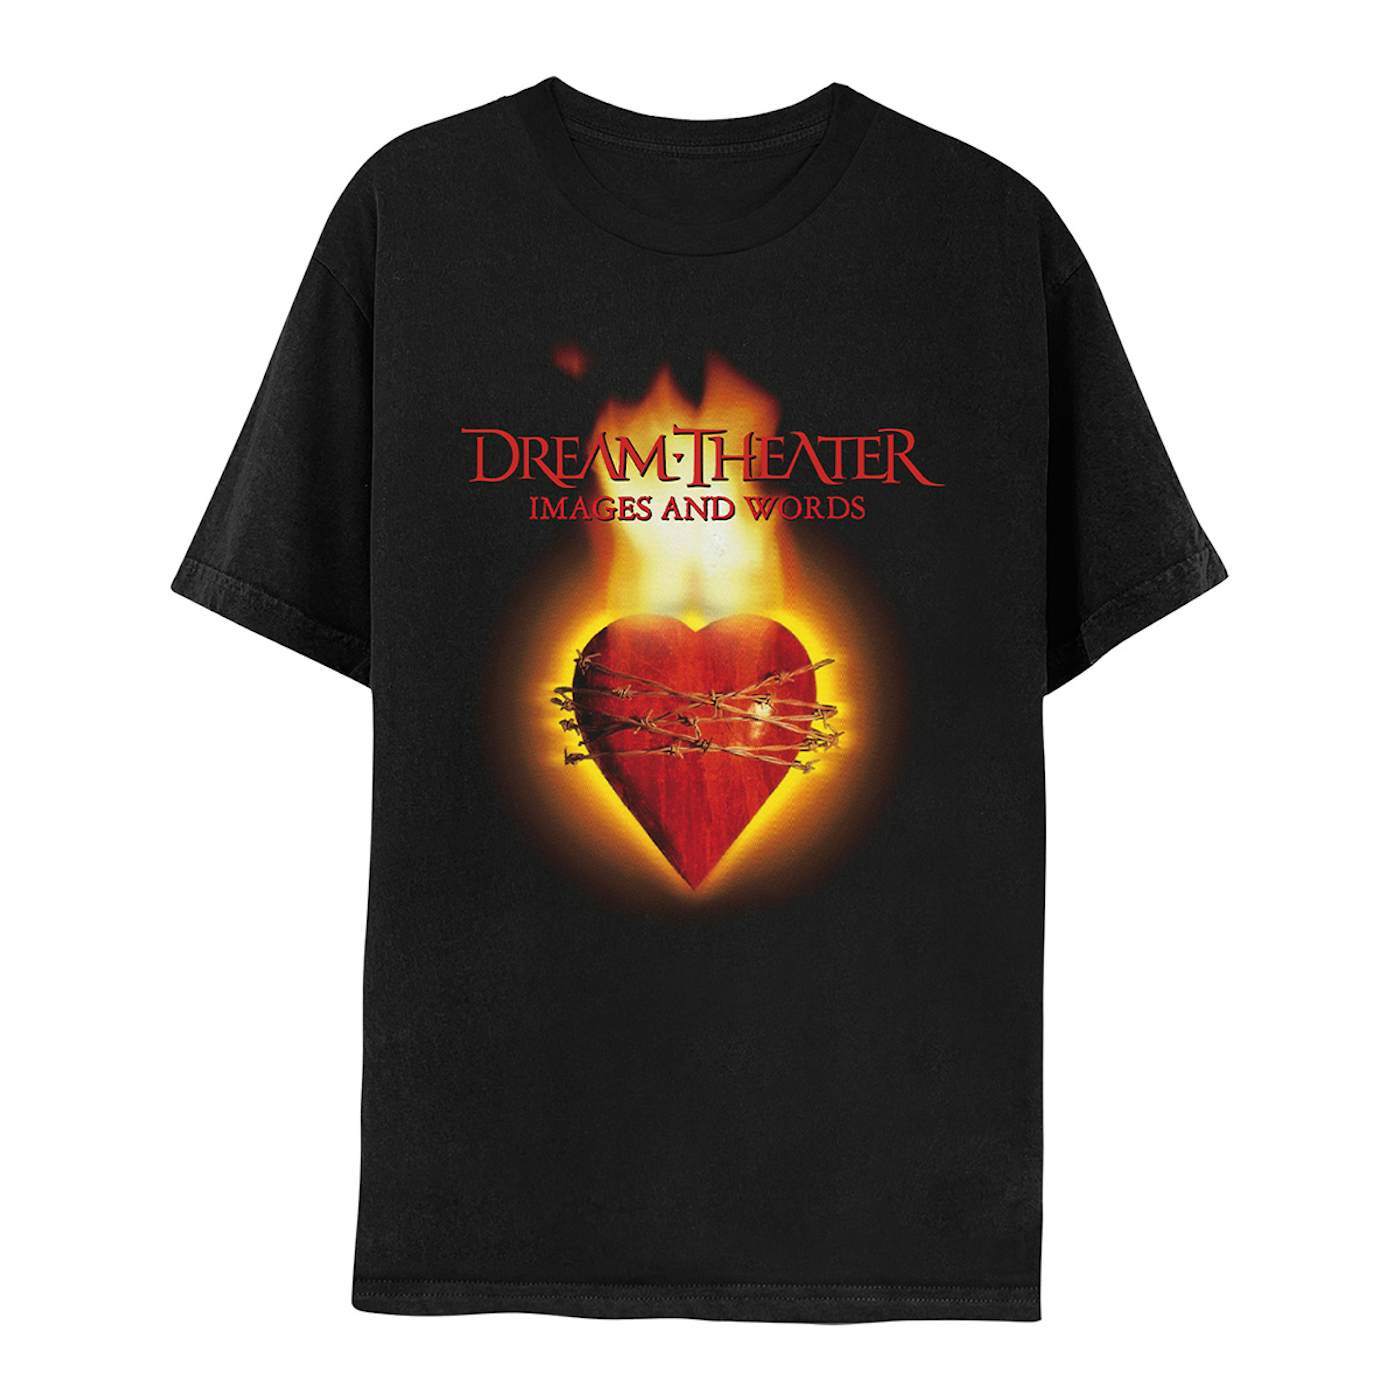 Dream Theater Images and Words 30th Anniversary Flaming Heart Tee